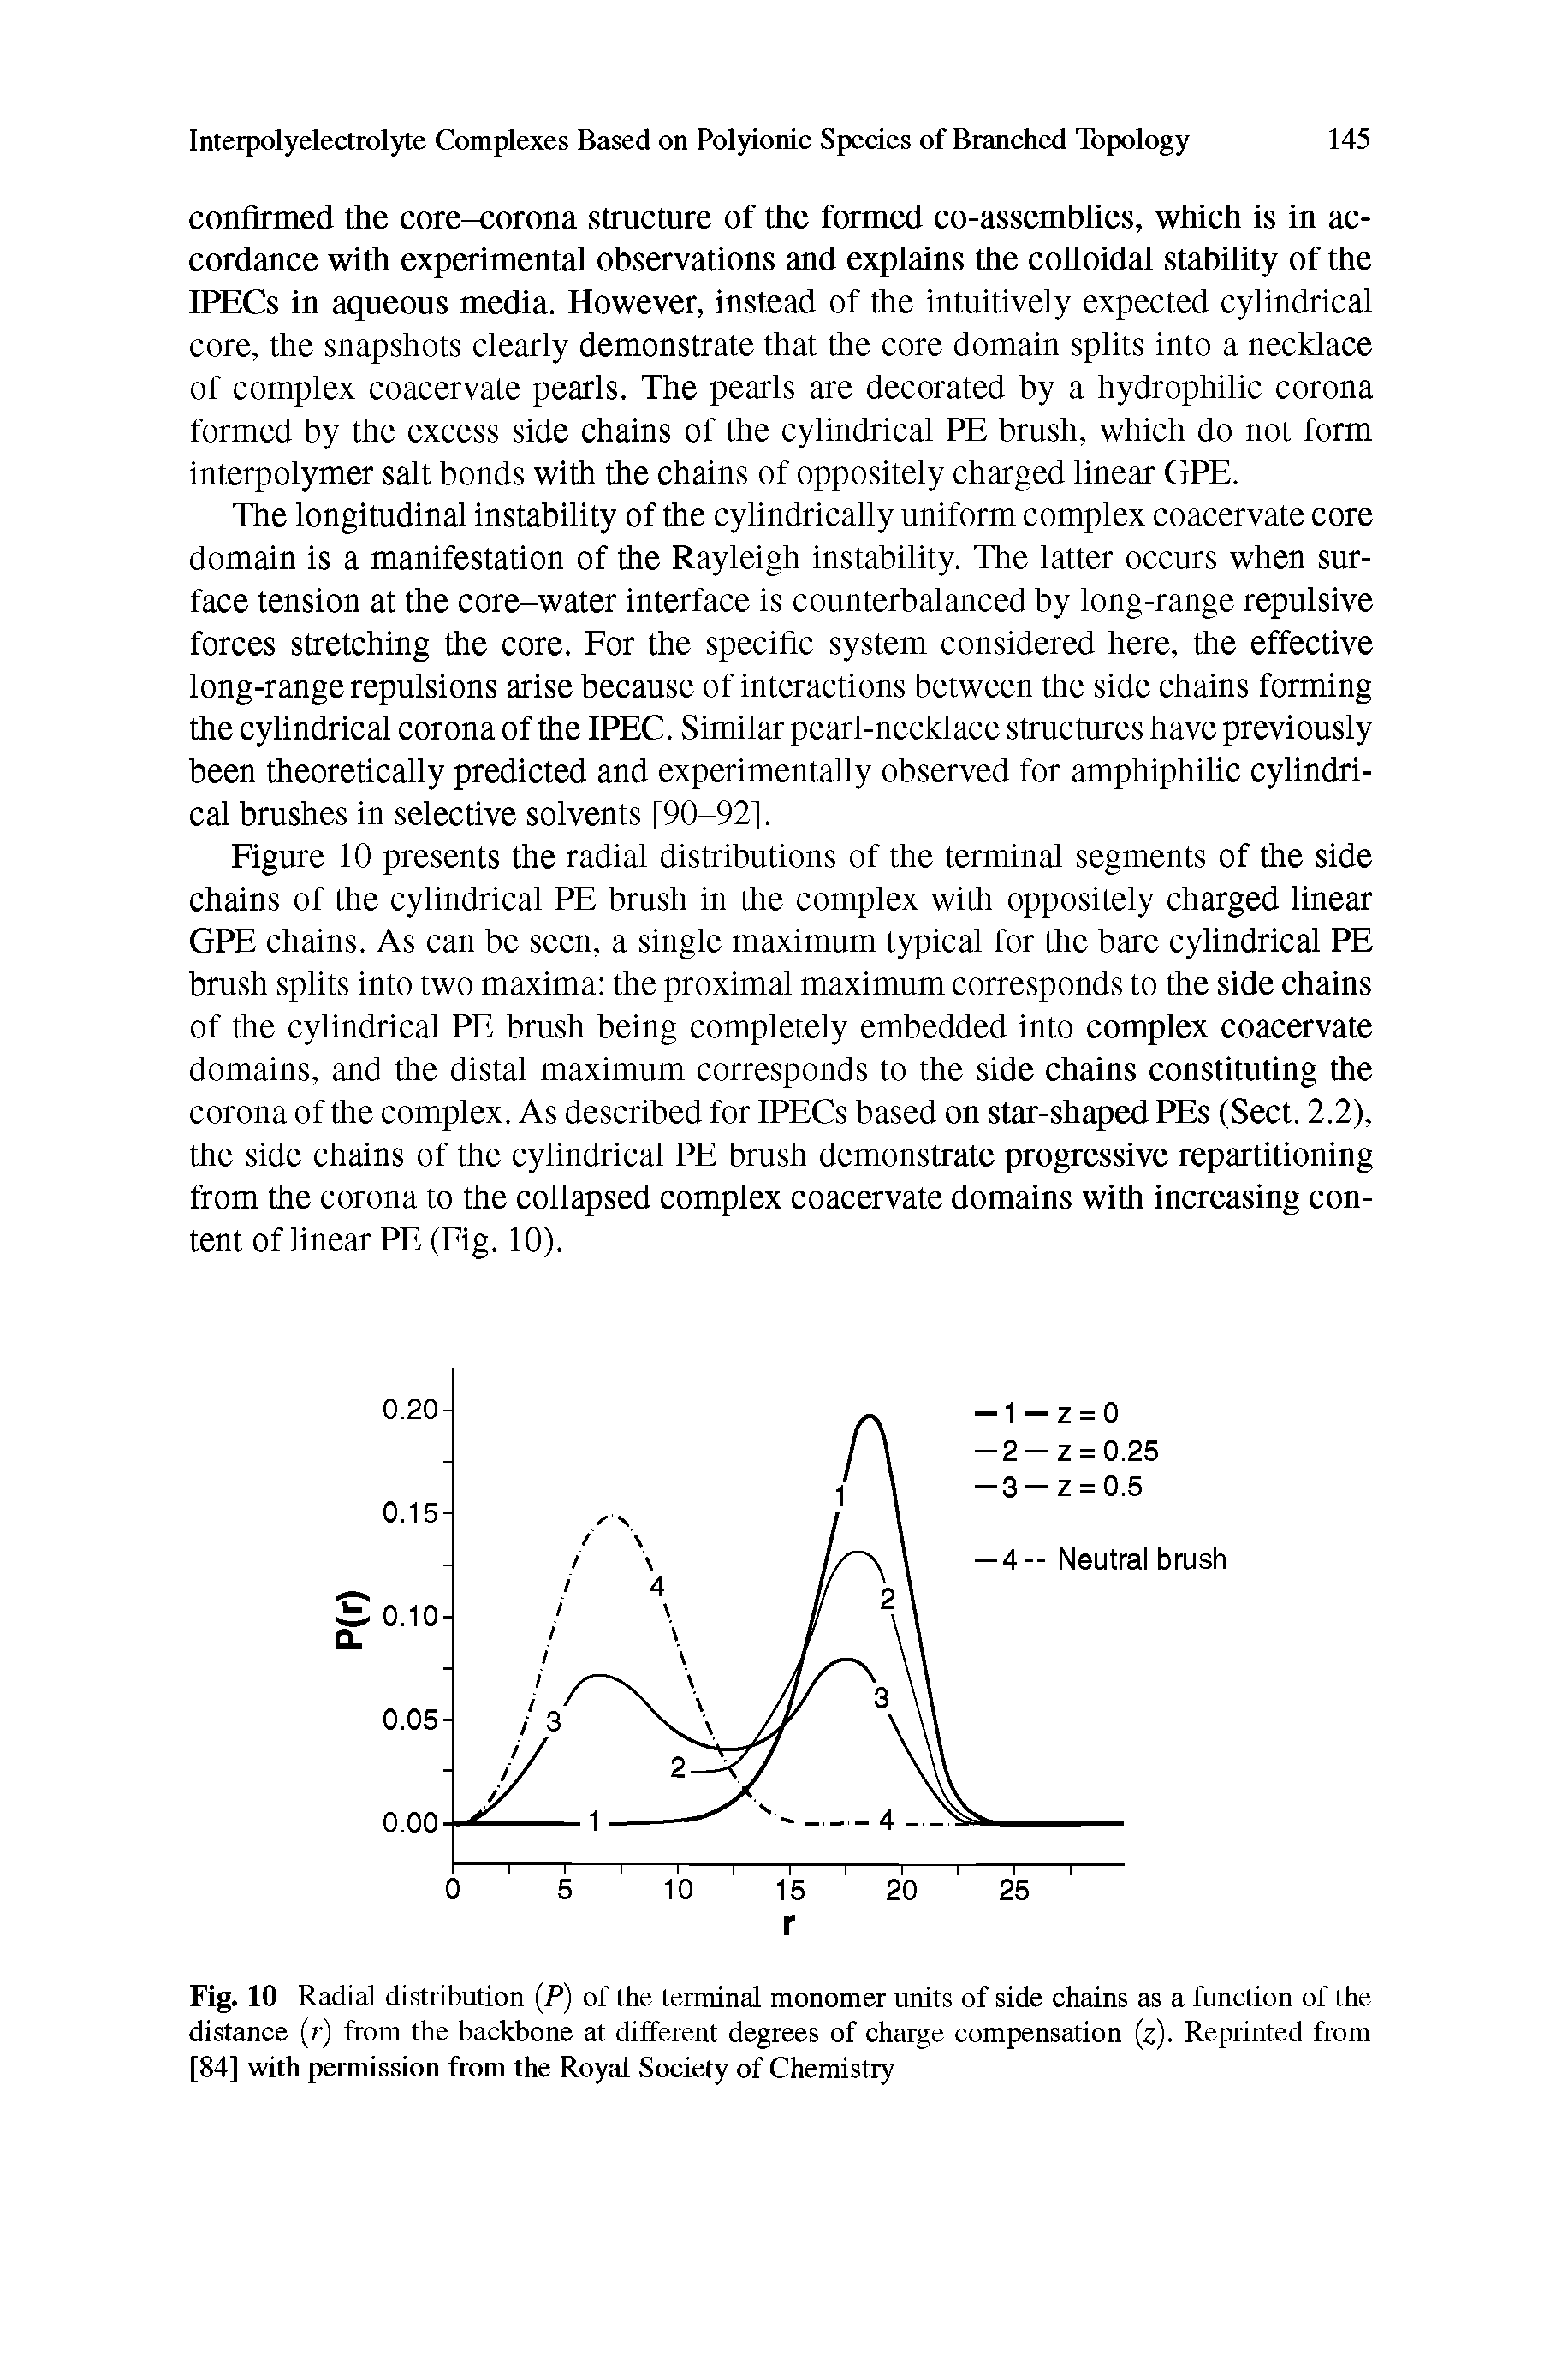 Fig. 10 Radial distribution (P) of the terminal monomer units of side chains as a function of the distance (r) from the backbone at different degrees of charge compensation (z). Reprinted from [84] with permission from the Royal Society of Chemistry...